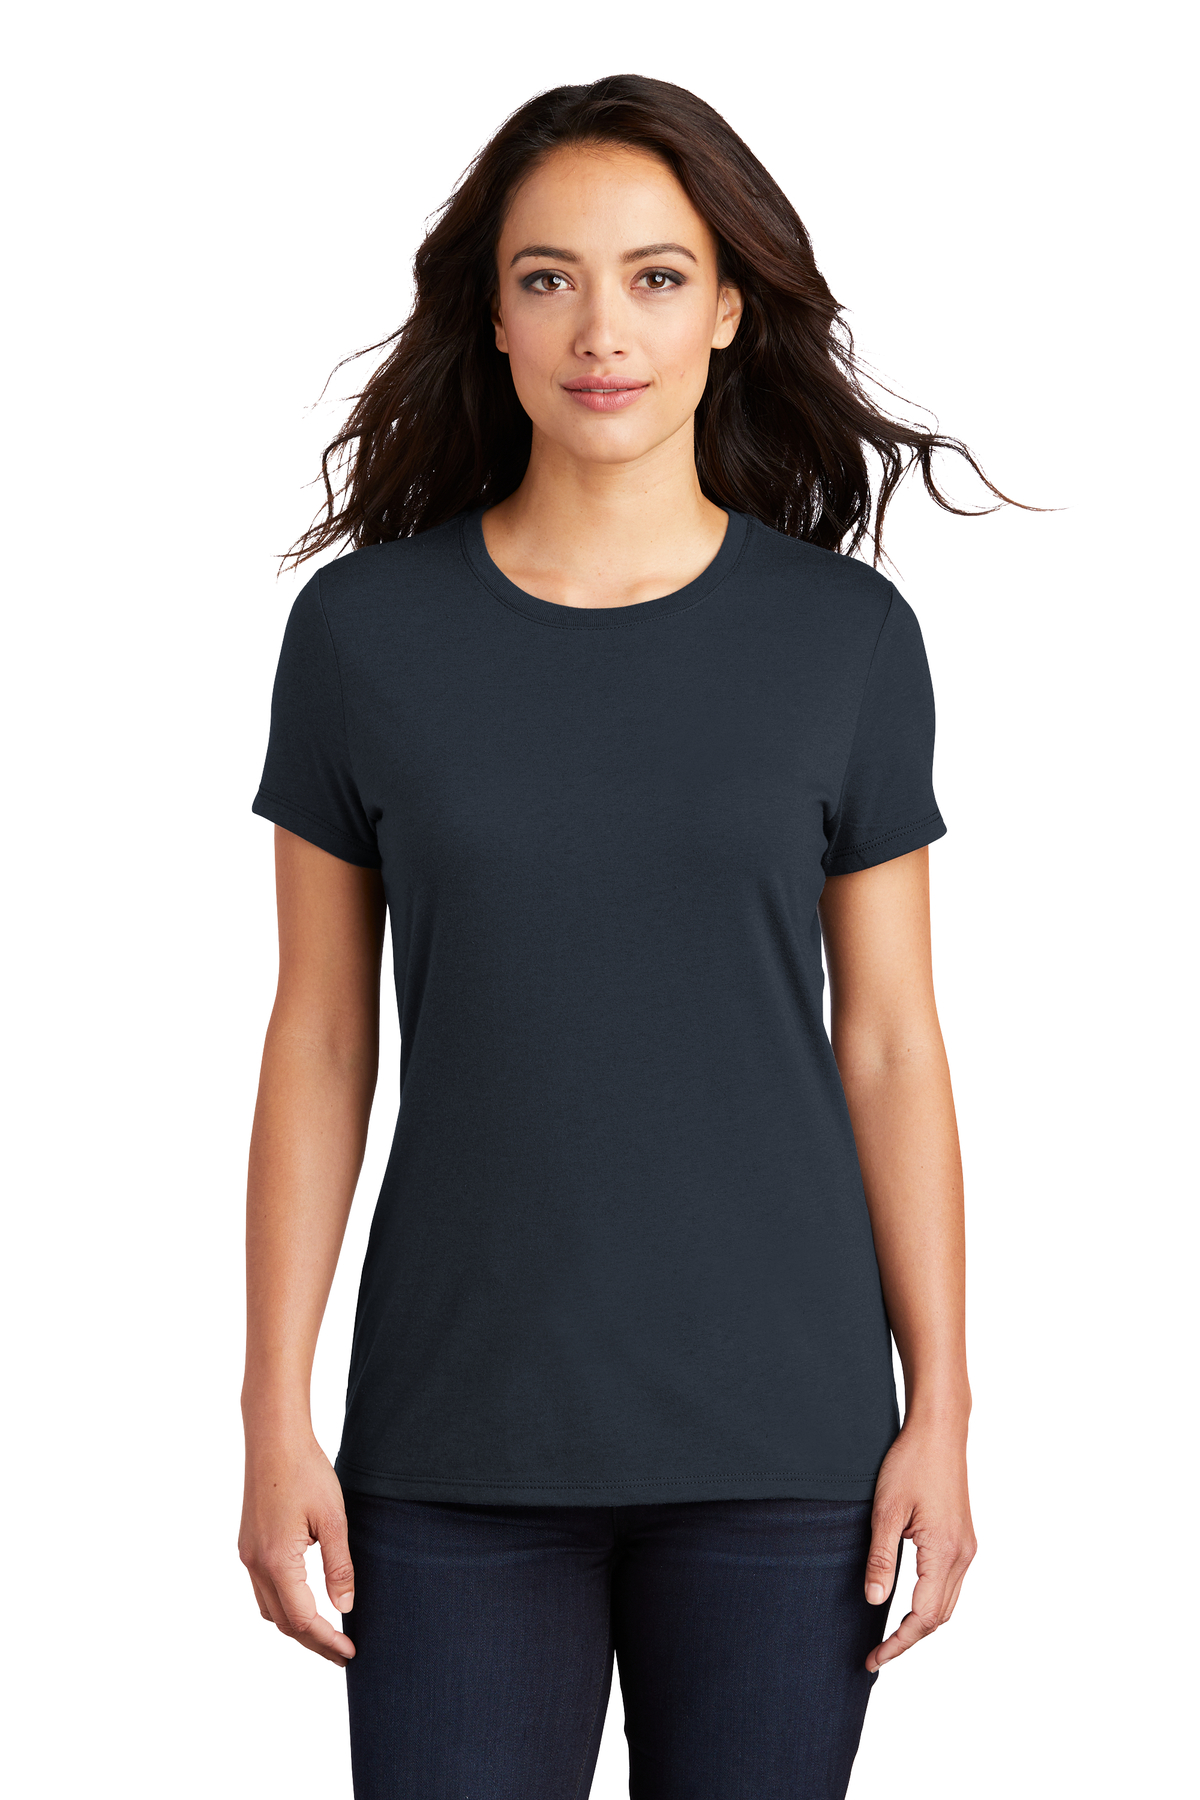 District Printed Women's Perfect TriBlend Tee | Women's Apparel ...